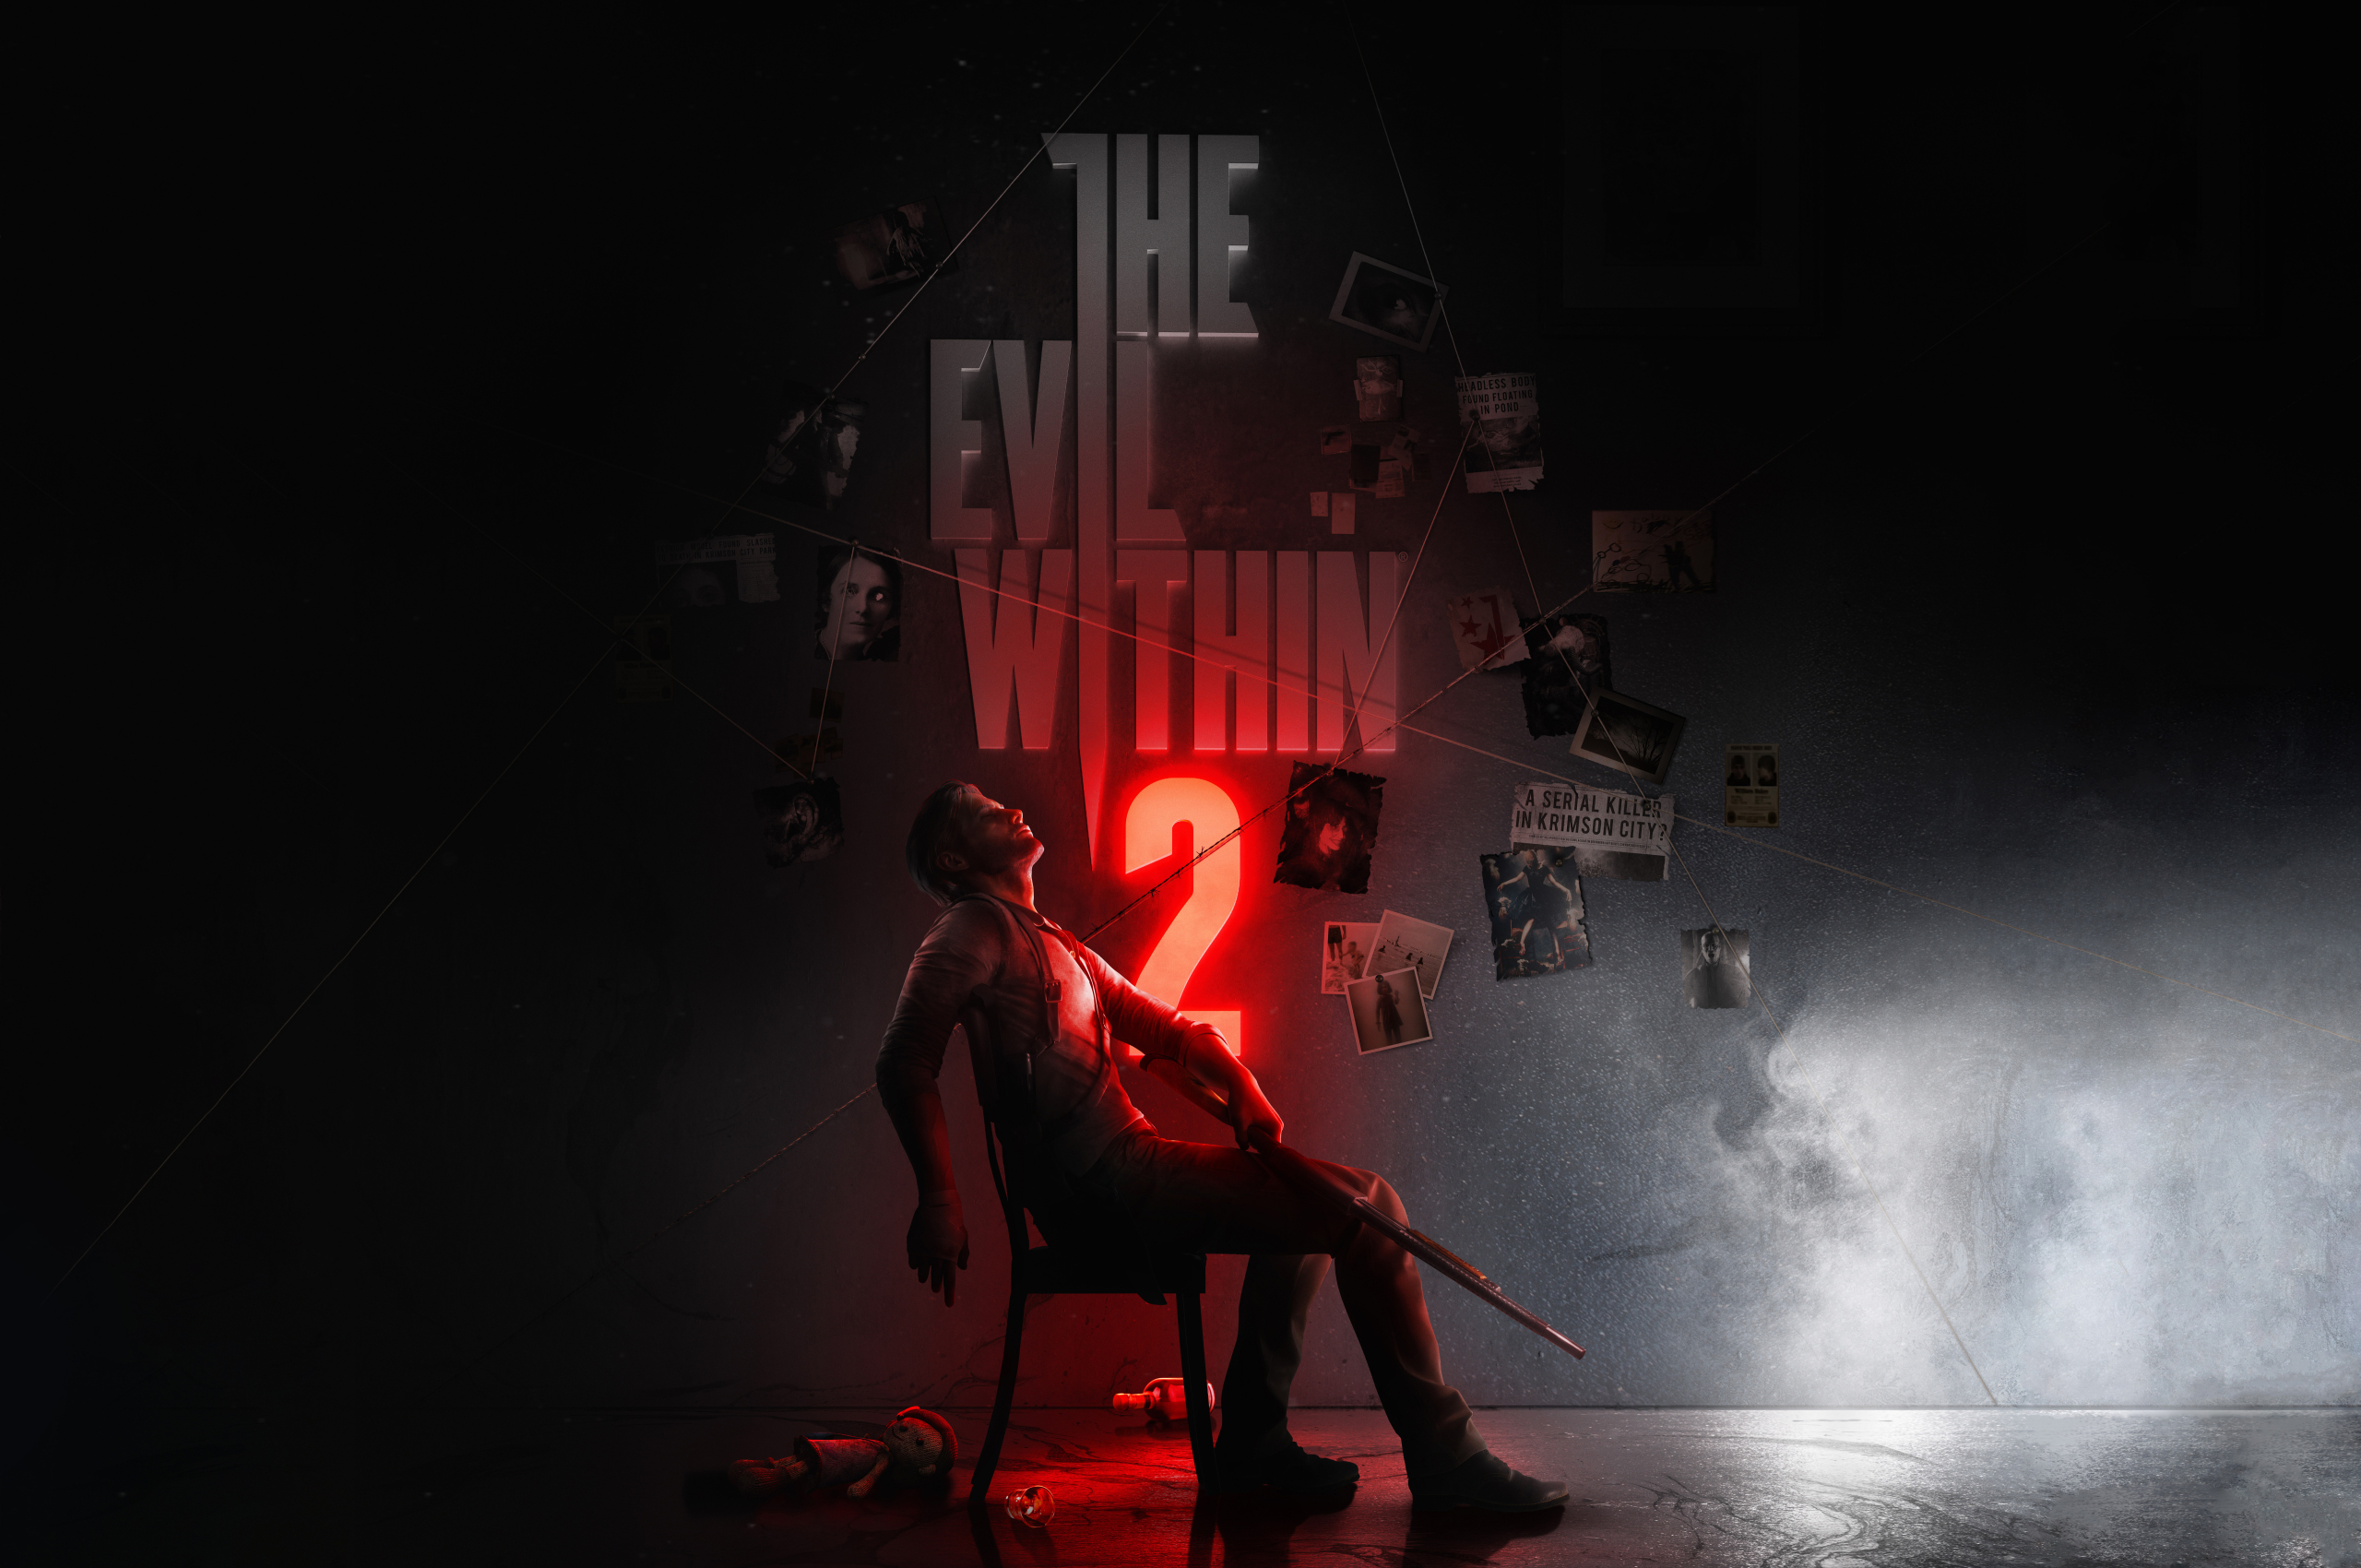 Will the evil within be on steam фото 42